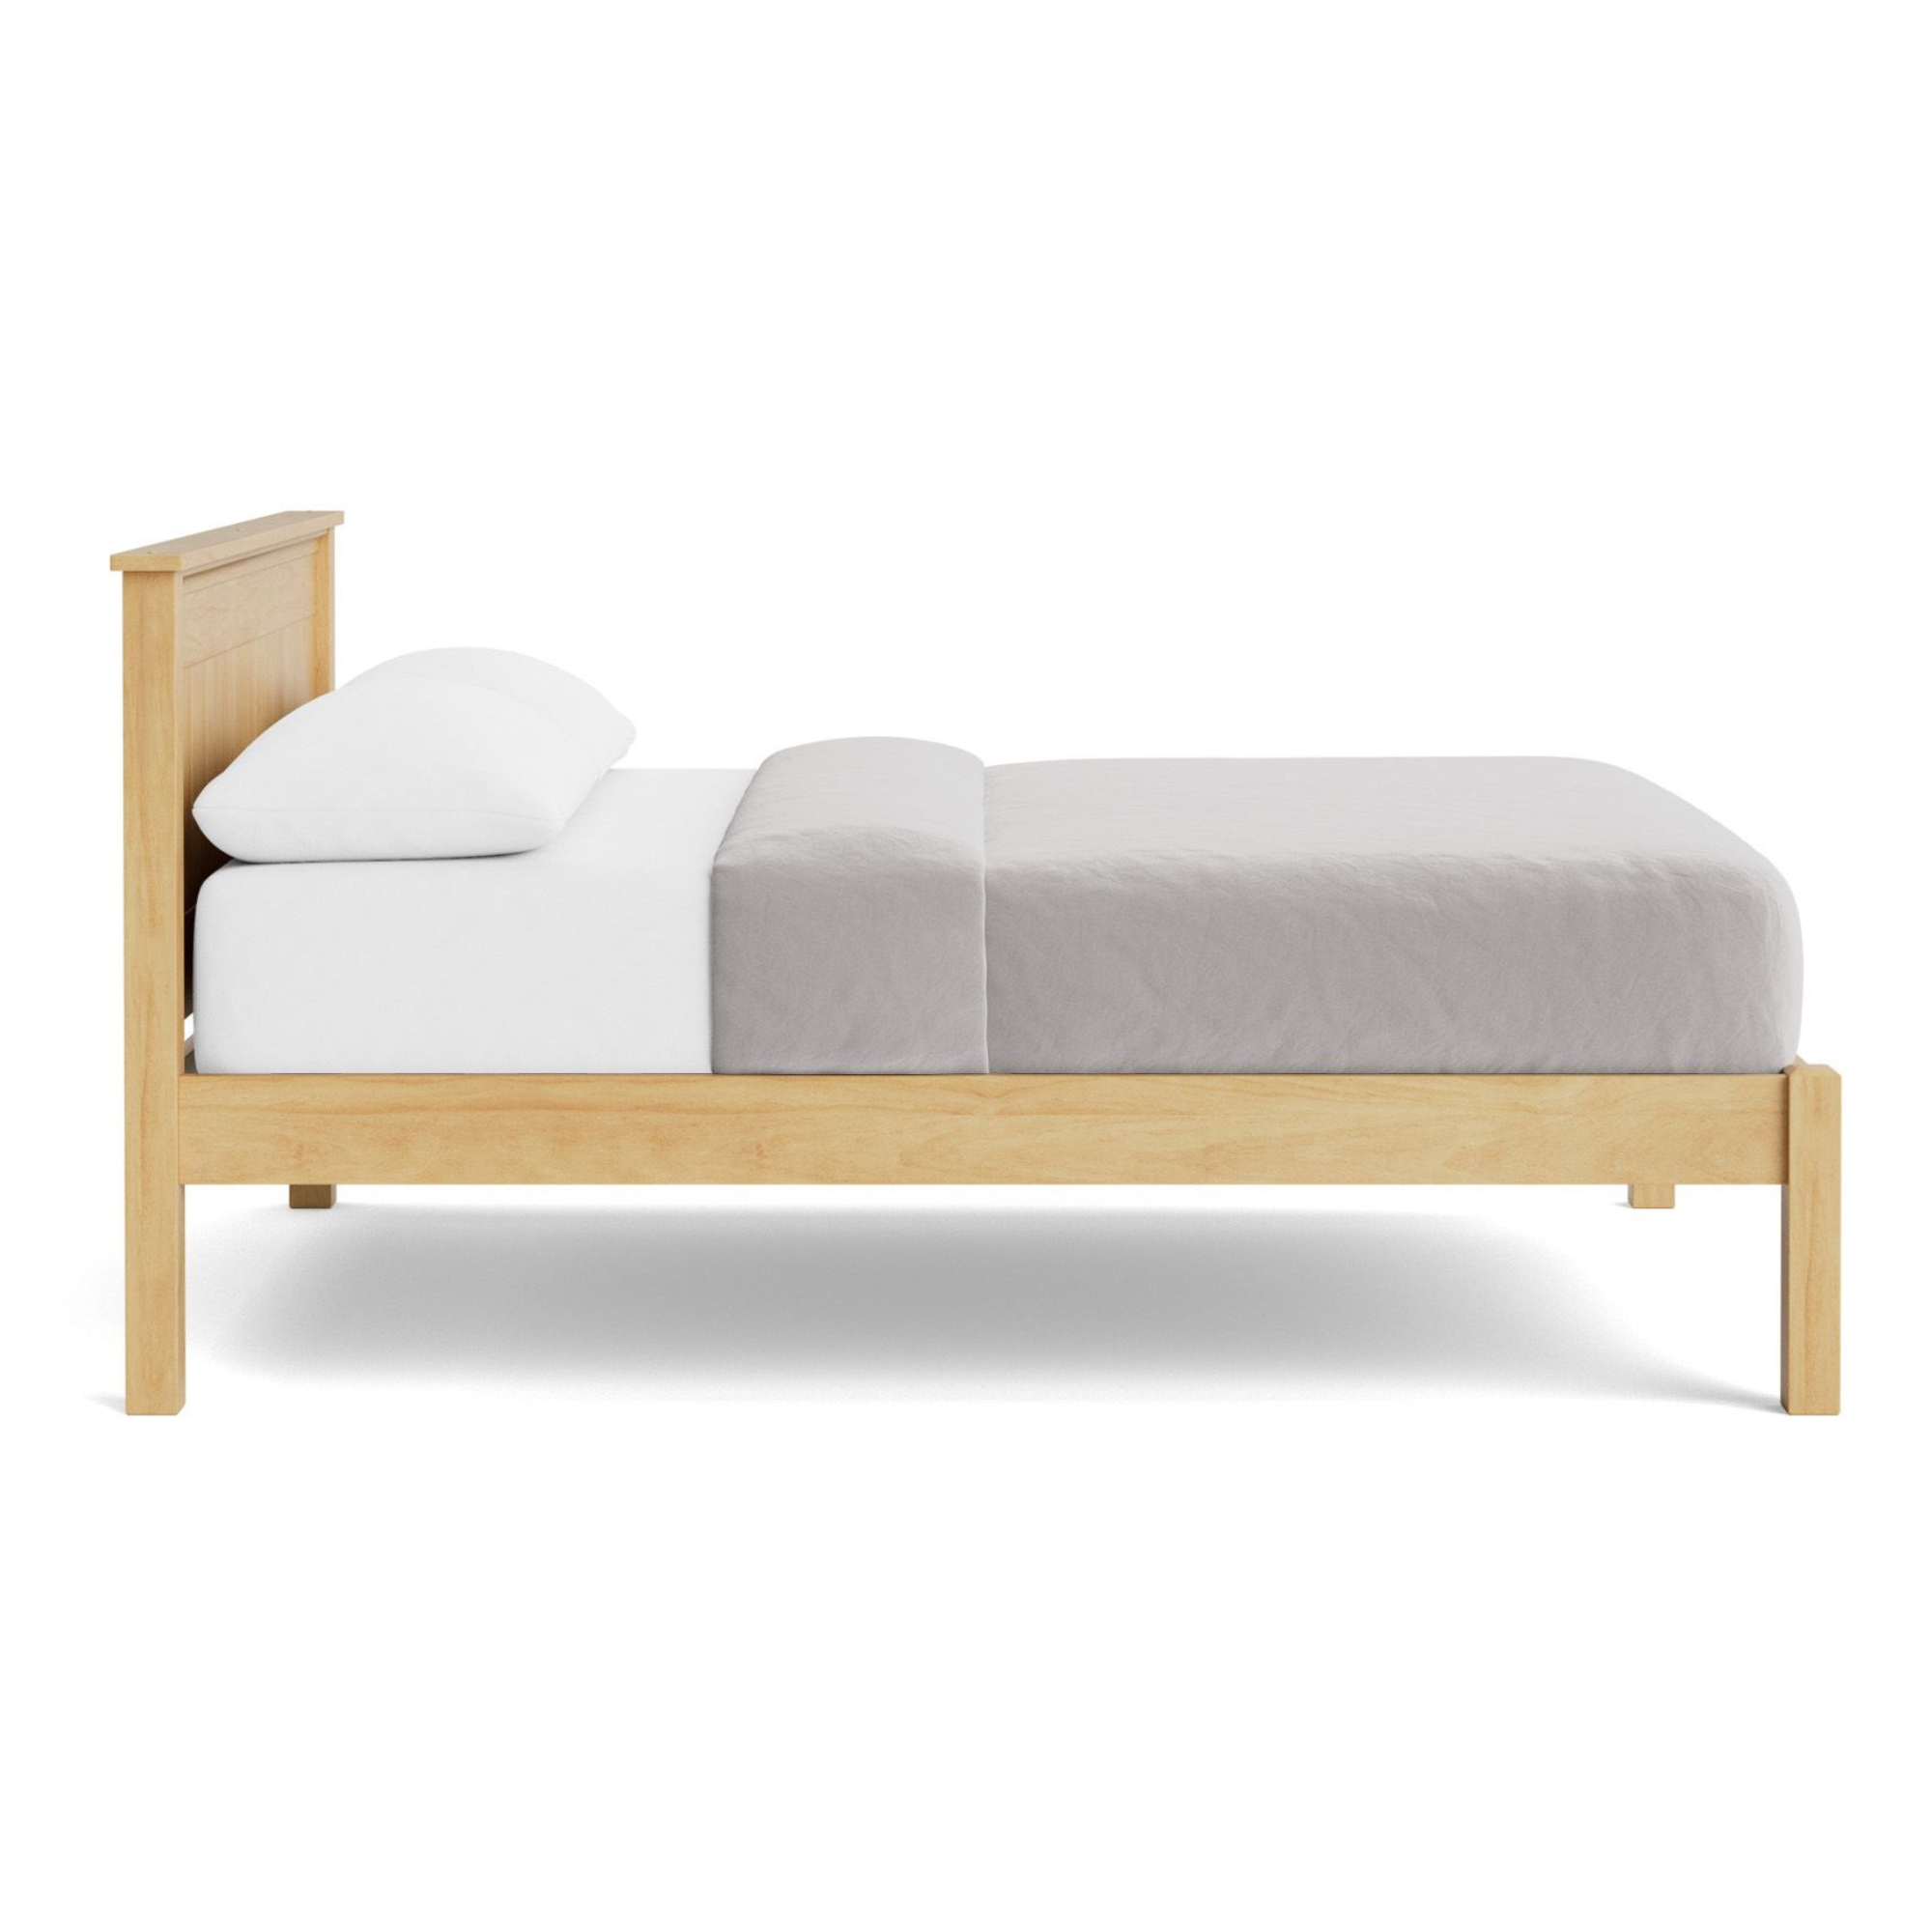 HILTON LOW FOOT SLAT BED | ALL SIZES | NZ MADE